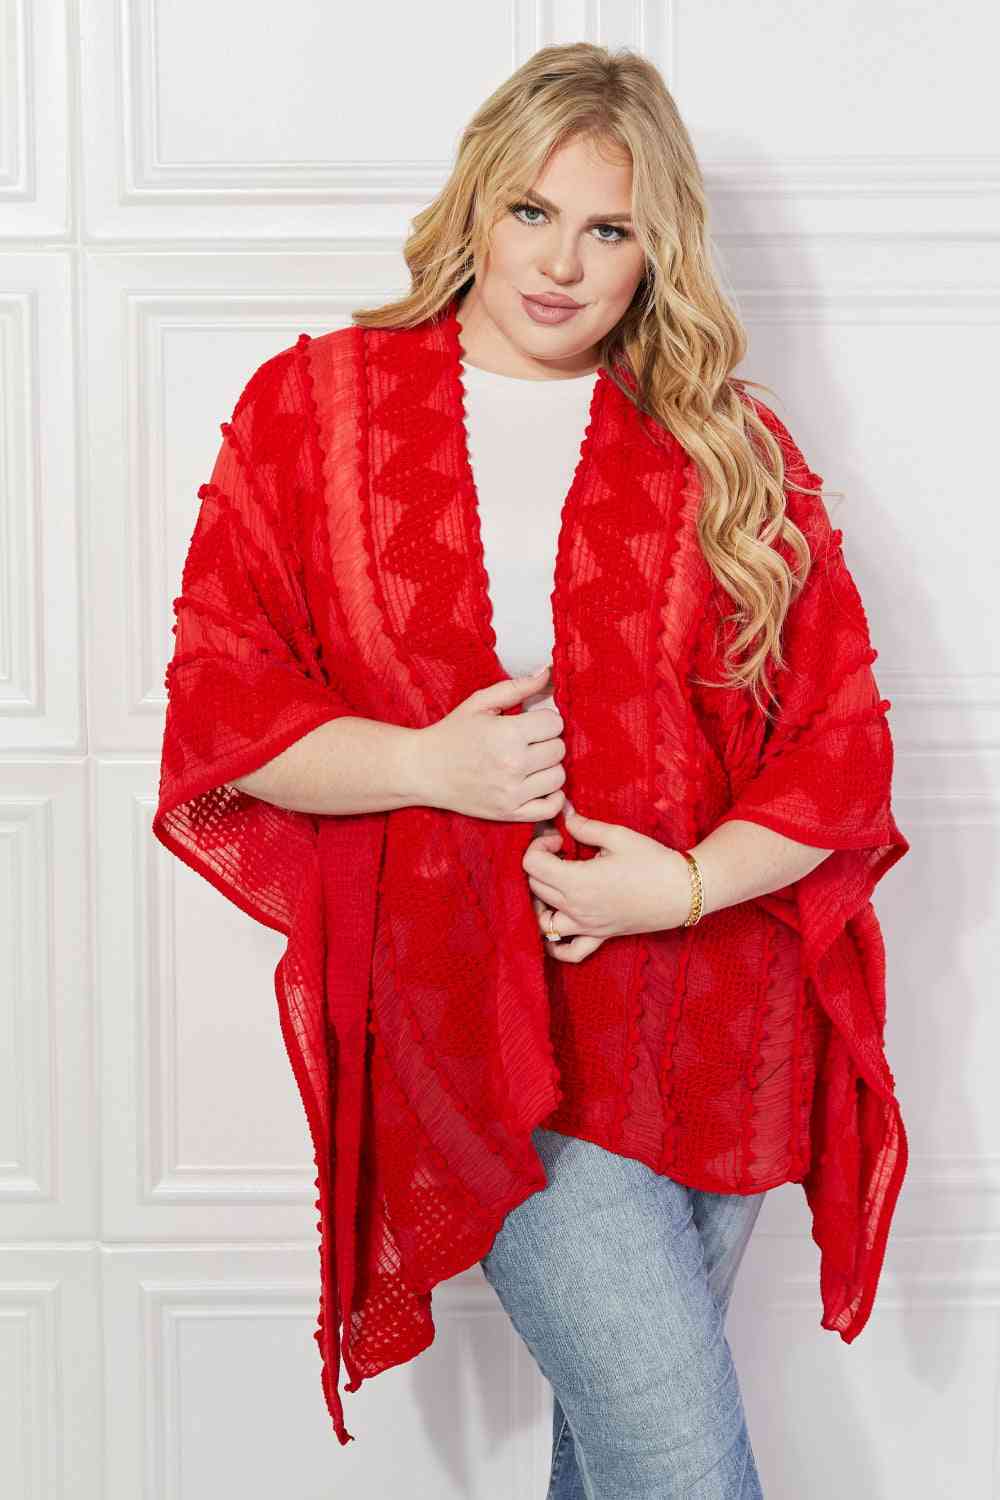 Pom-Pom Asymmetrical Poncho Cardigan in Red - Red / One Size - Women’s Clothing & Accessories - Outerwear - 1 - 2024